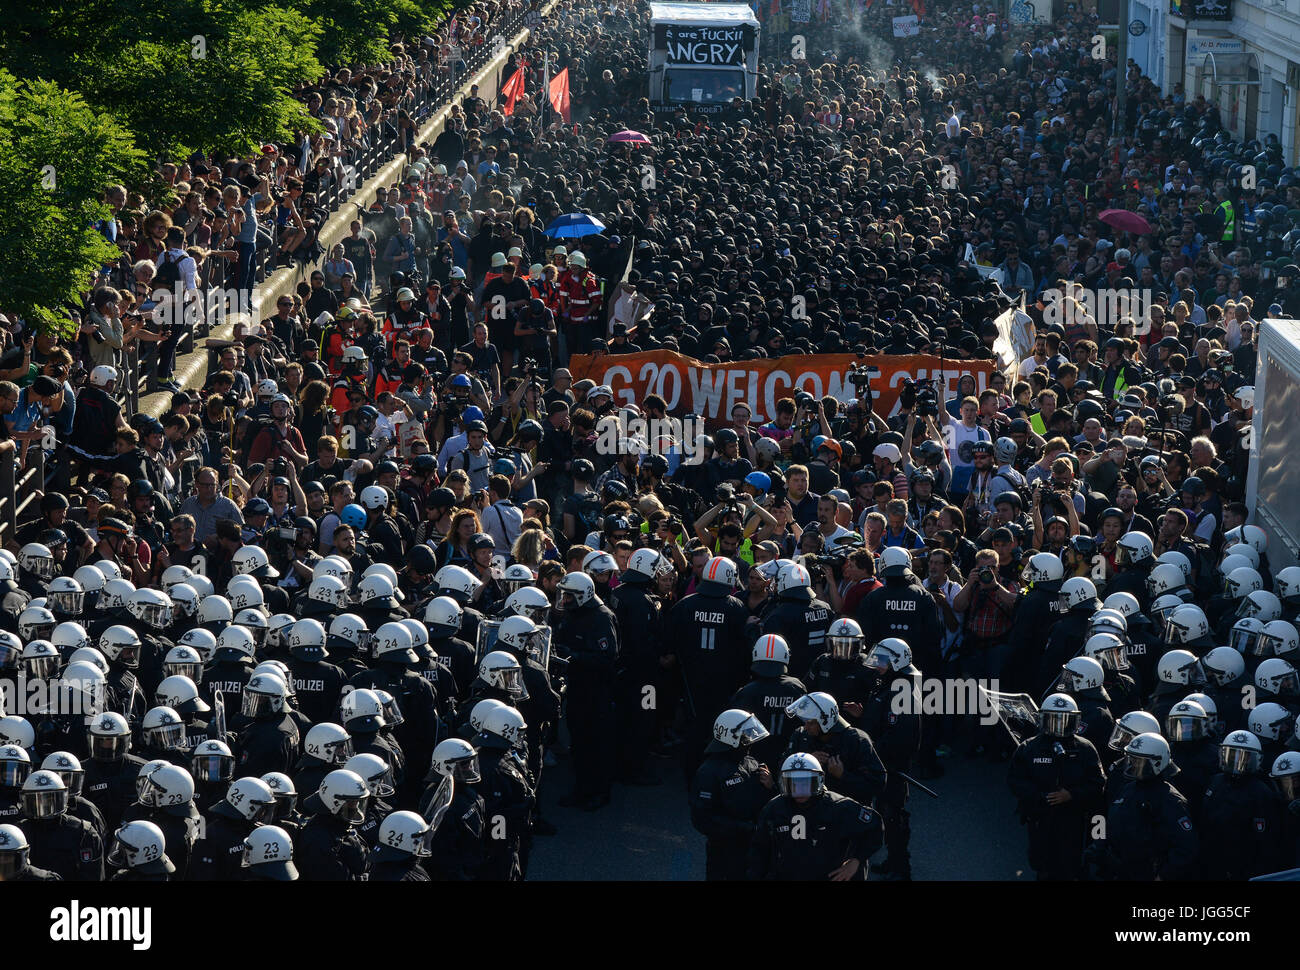 Hamburg, Germany. 6th July, 2017. fish market, protest rally 'G-20 WELCOME TO HELL' against G-20 summit in july 2017, black block with mummed extremists and police brigade, Credit: Joerg Boethling/Alamy Live News Stock Photo